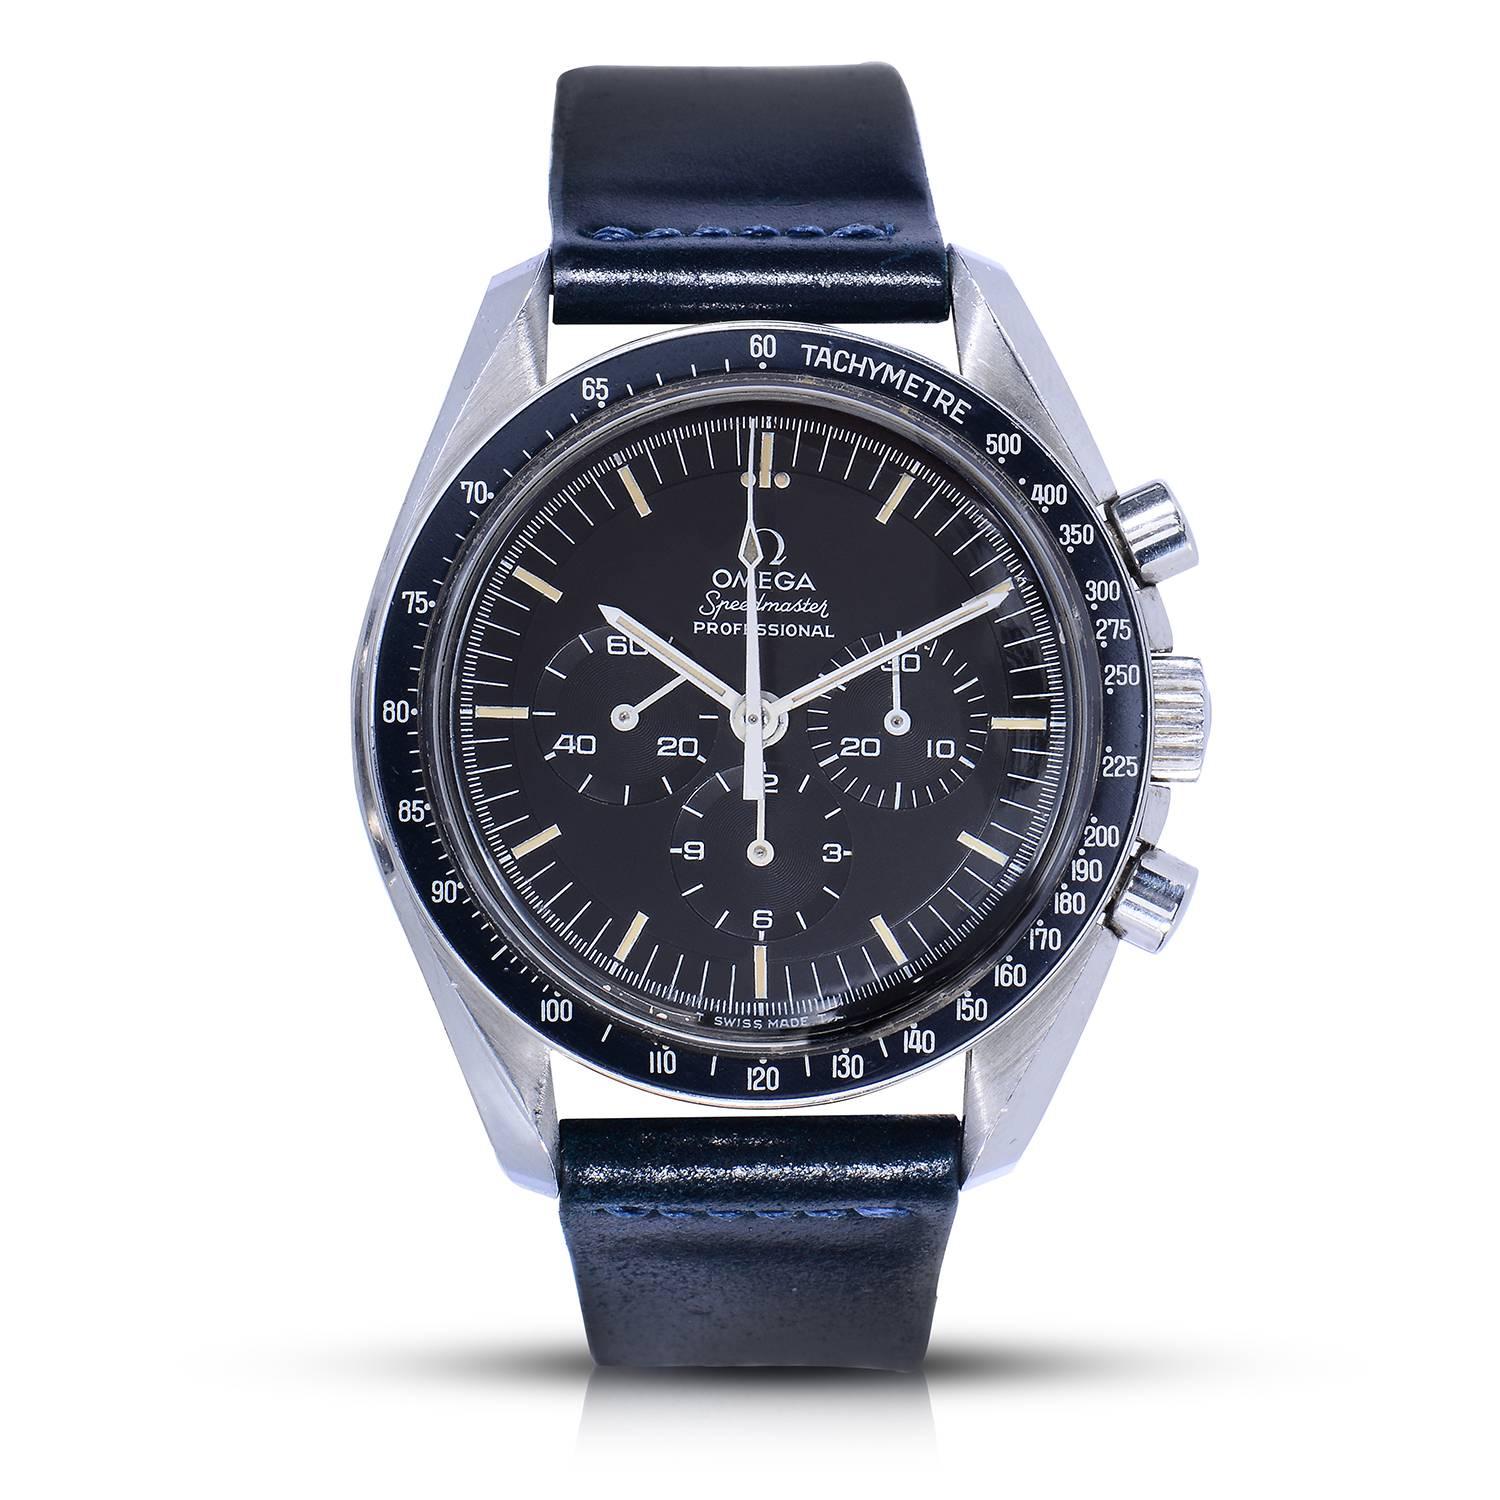 Rare Vintage Omega 1969 Transitional Speedmaster Watch
Stainless Steel Manual Wind Chronograph
Rare Straight Writing Engraved Case-Back
861 Manual Wind Movement
Black Matte Dial
Proper Working Condition
Fitted on Brand New Blue Shell Cordovan